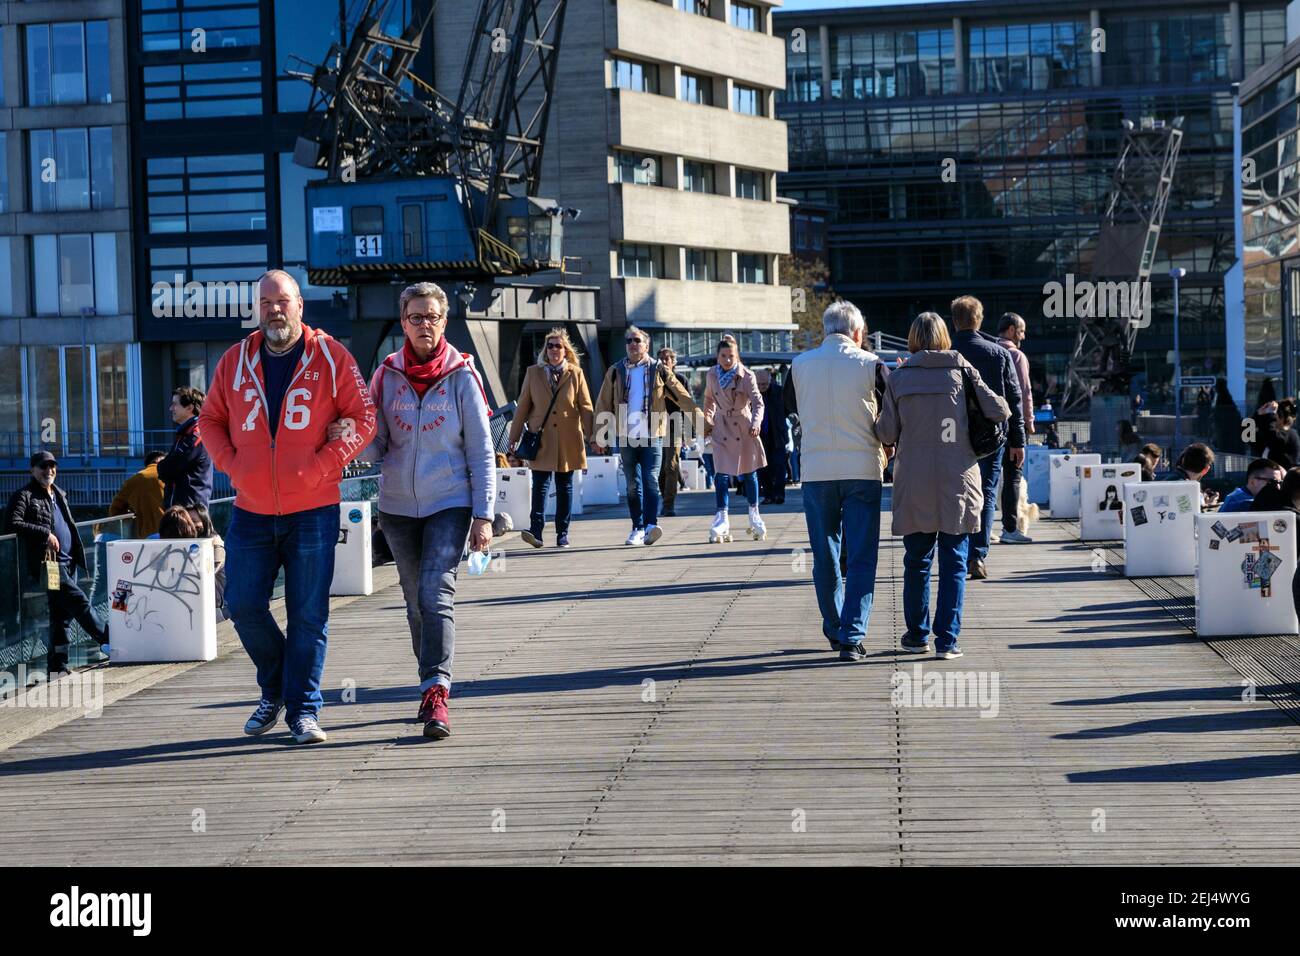 Düsseldorf, NRW, 2021. People enjoy their Sunday afternoon in beautiful warm sunshine with temperatures up to 18 degrees in the popular MedienHafen (media harbour) district, a redeveloped area by the river Rhine hosting media companies, offices, entertainment, restaurants and leisure facilities in Düsseldorf, the capital of Germany's most populous state of North Rhine-Westphalia. Credit: Imageplotter/Alamy Live News Stock Photo